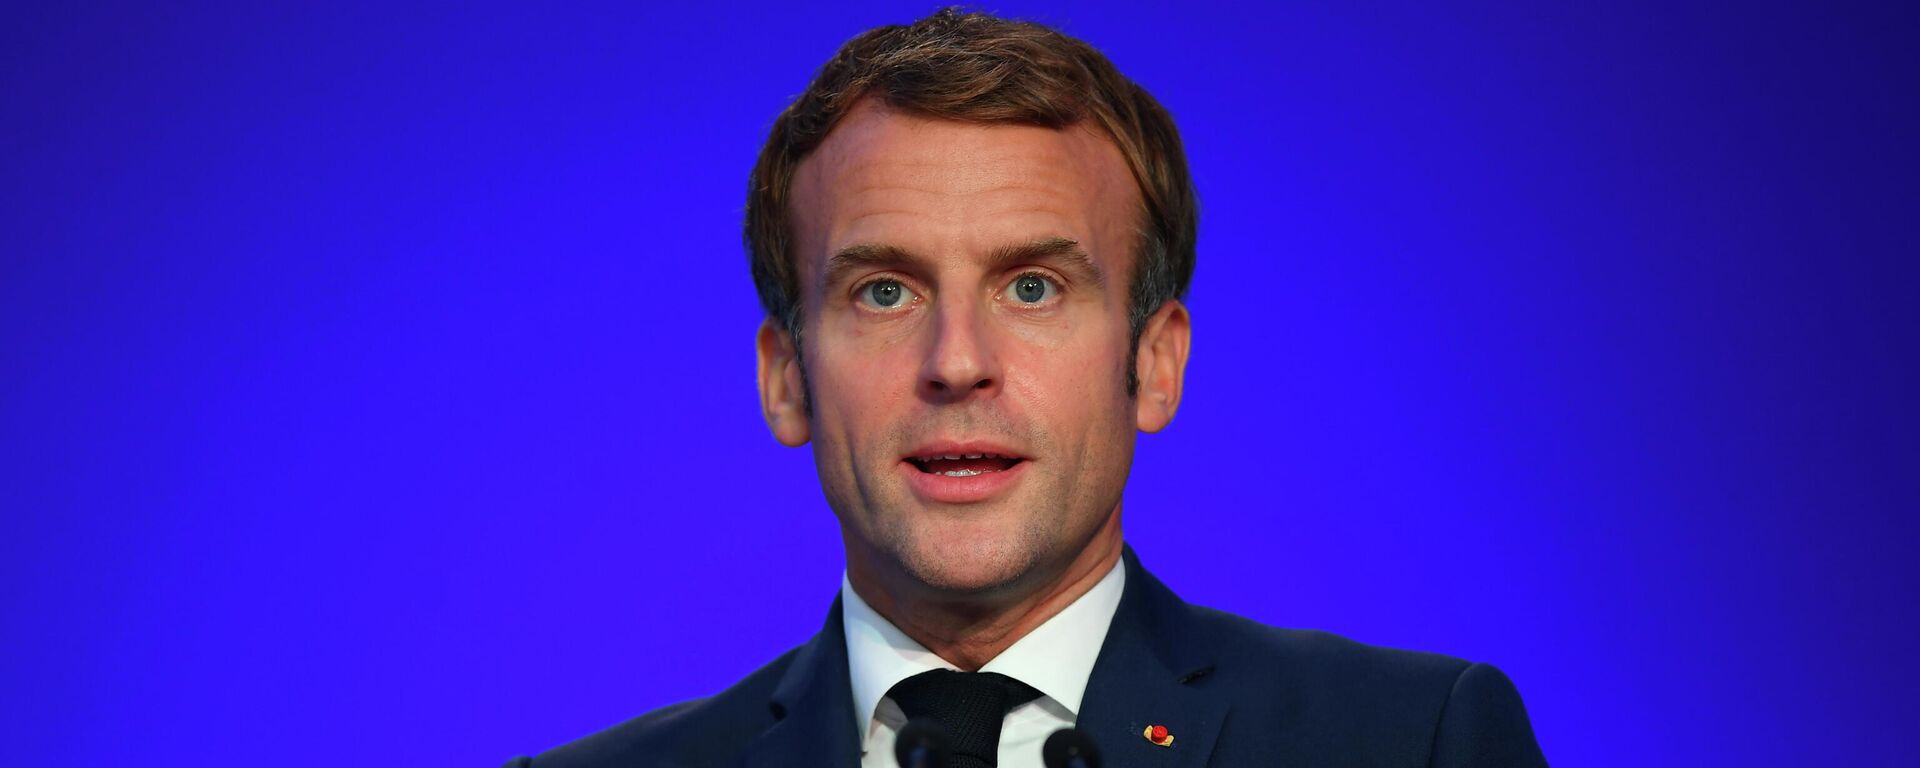 France's President Emmanuel Macron presents his national statement as a part of the World Leaders' Summit at the UN Climate Change Conference (COP26) in Glasgow, Scotland, Britain November 1, 2021 - Sputnik International, 1920, 04.11.2021